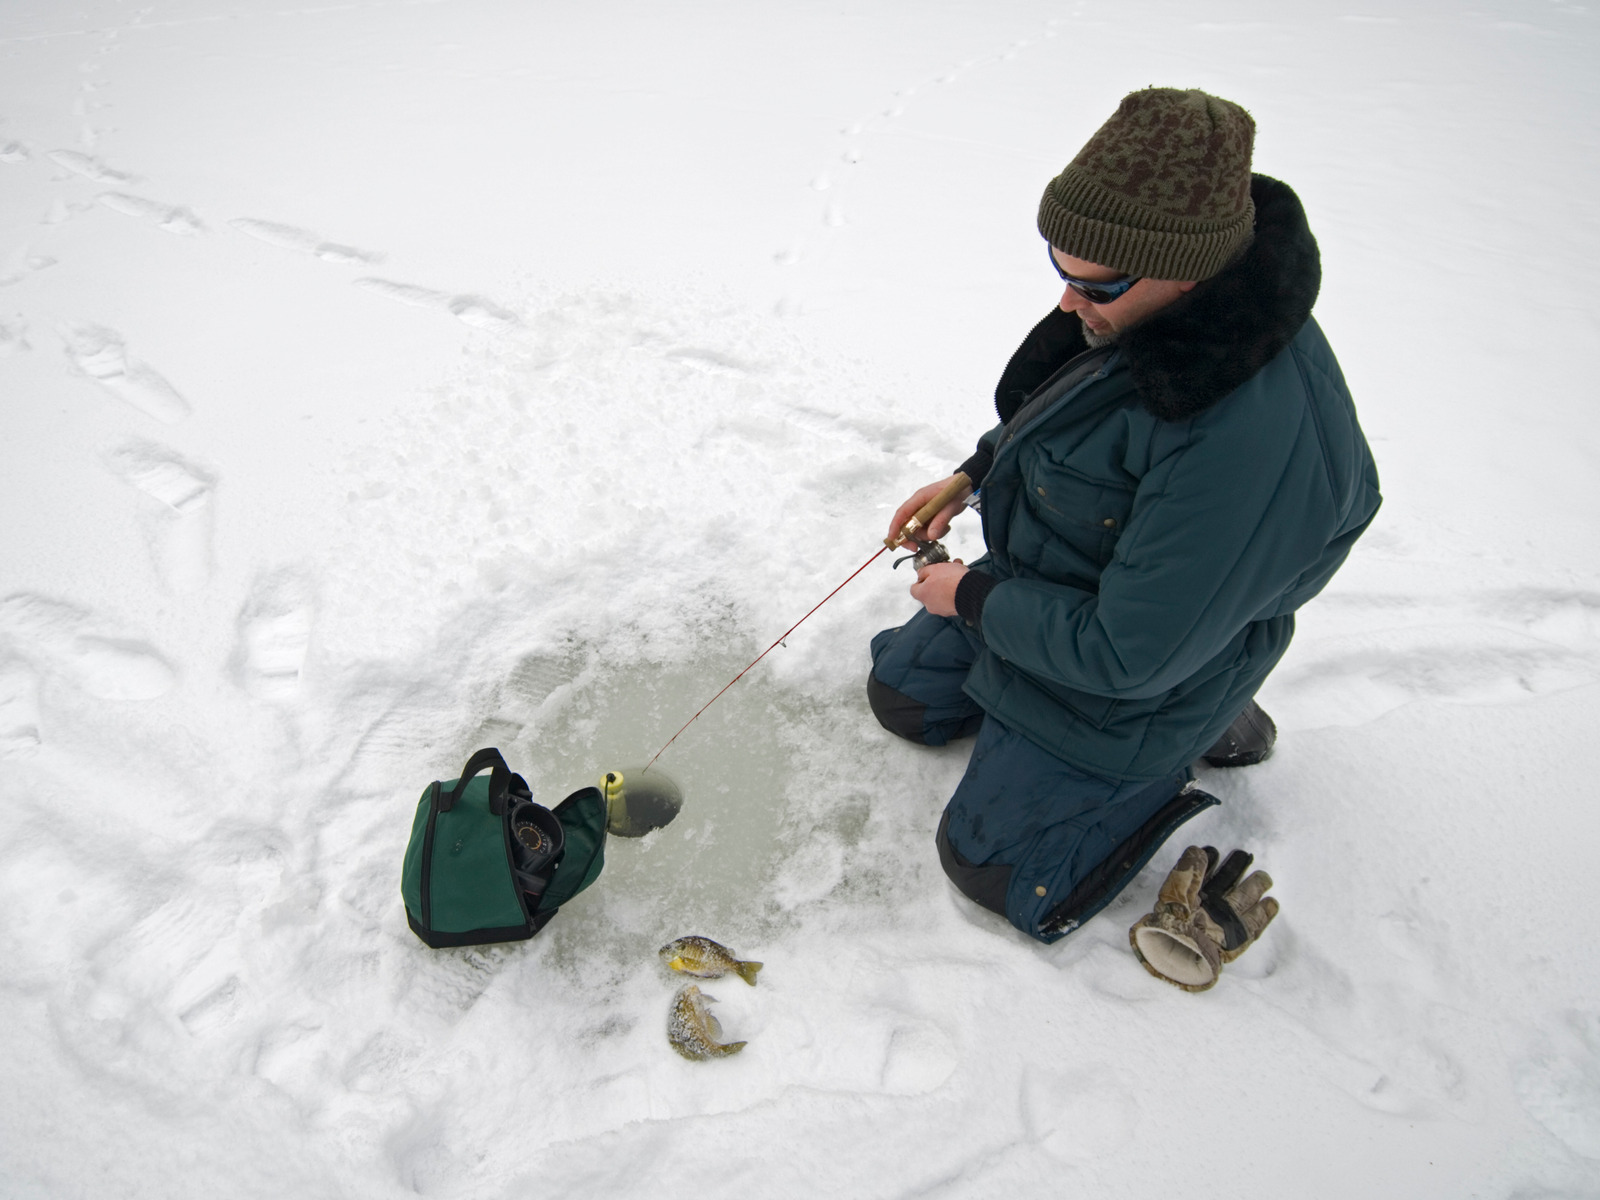 Ice fishing on a Michigan pond, an angler uses electronic fish finder to catch fish.